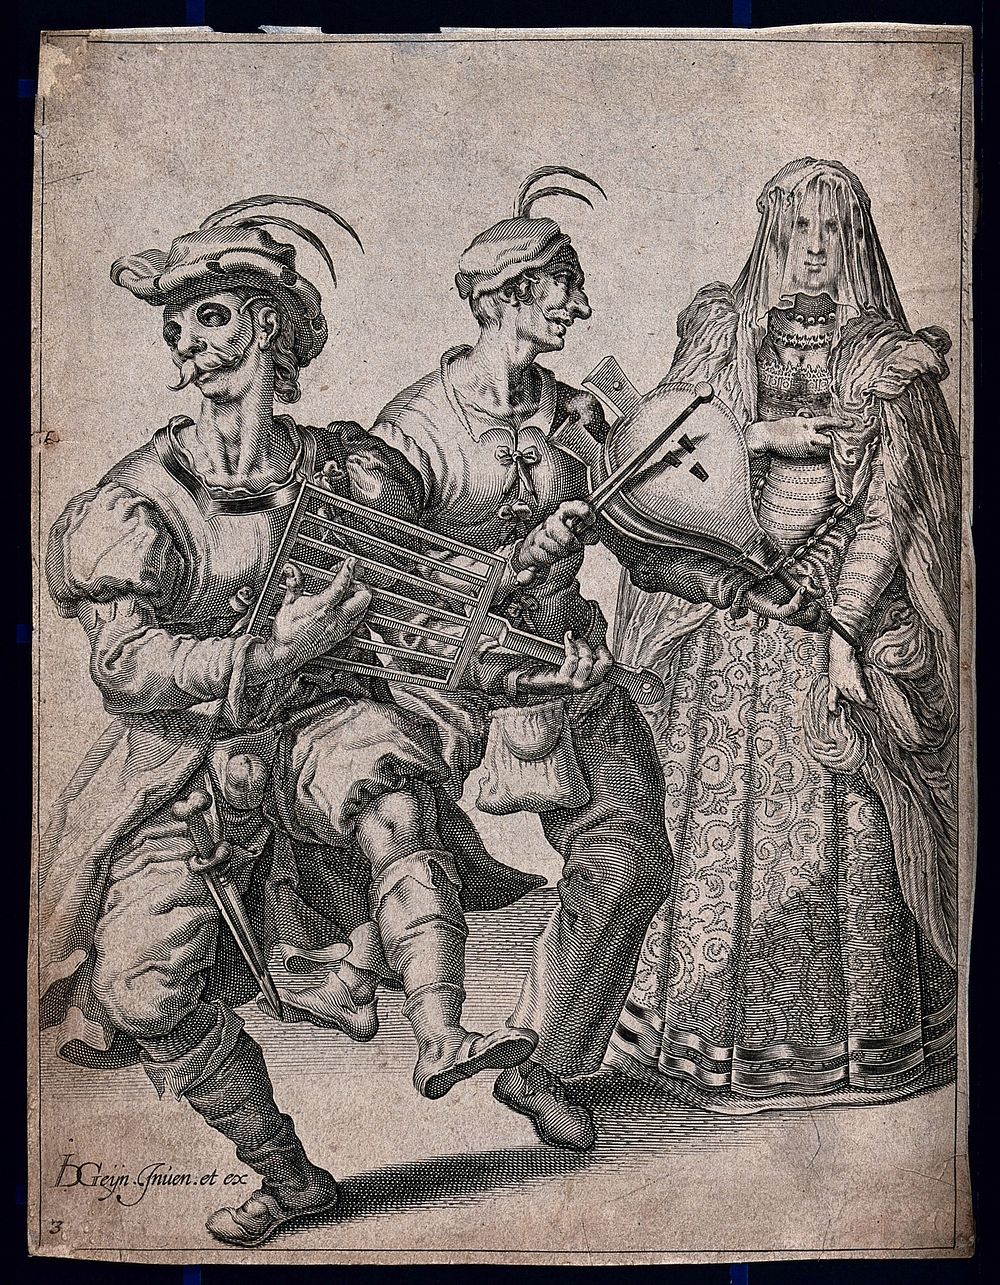 A masquerade: two men in masks pretend to play musical instruments for a young woman who is wearing a veil. Engraving after…